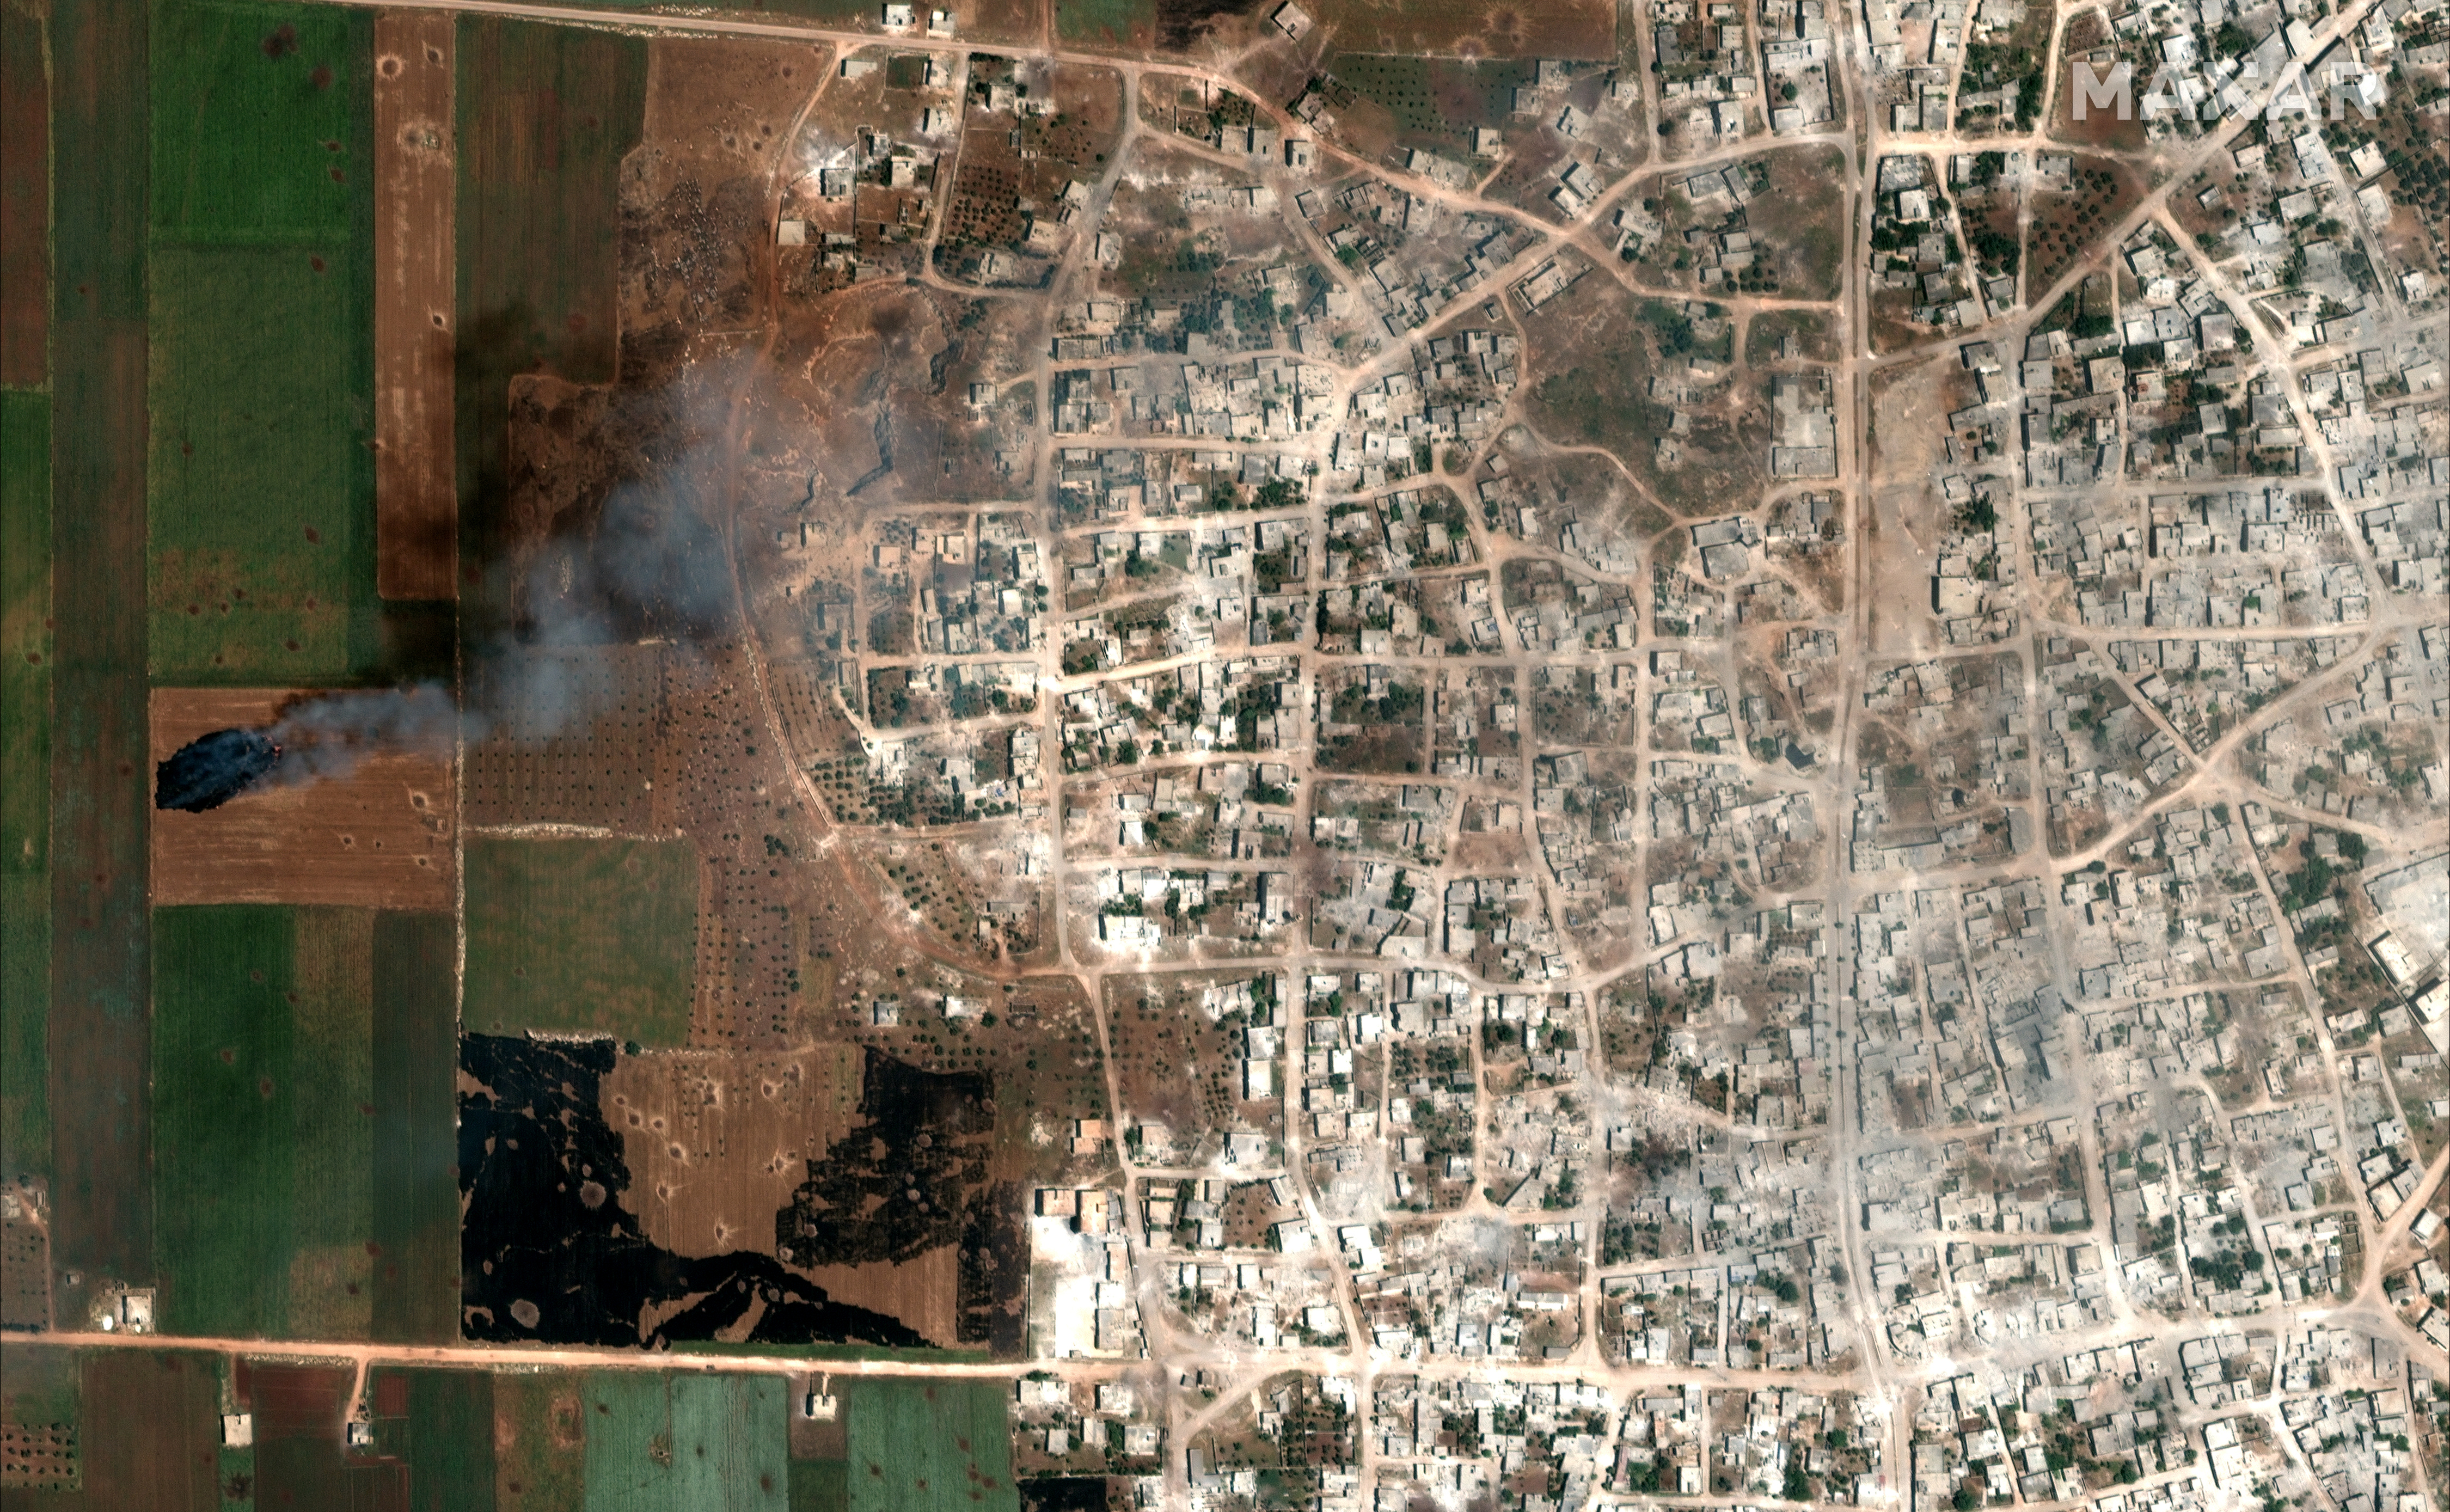 Fires in Hbit, Idlib Province, Syria.